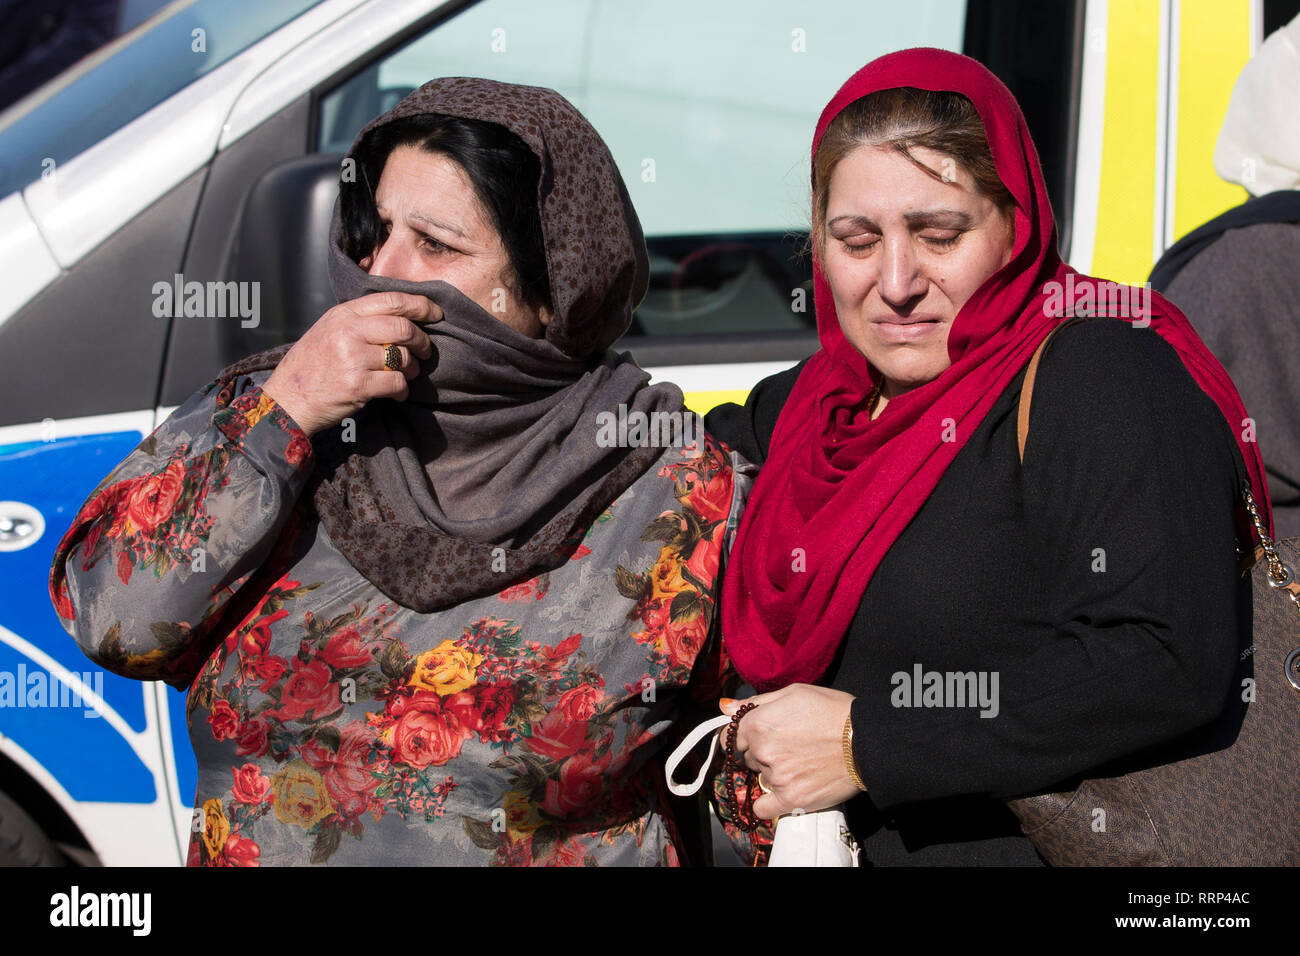 A group of women, one identified as the mother of the victim (name not given, left) arrive at at the scene on Norwood Road, Bordesley Green where 17-year-old Hazrat Umar was stabbed and killed on Monday, becoming the third teenager in a fortnight to be stabbed to death in Birmingham. Stock Photo